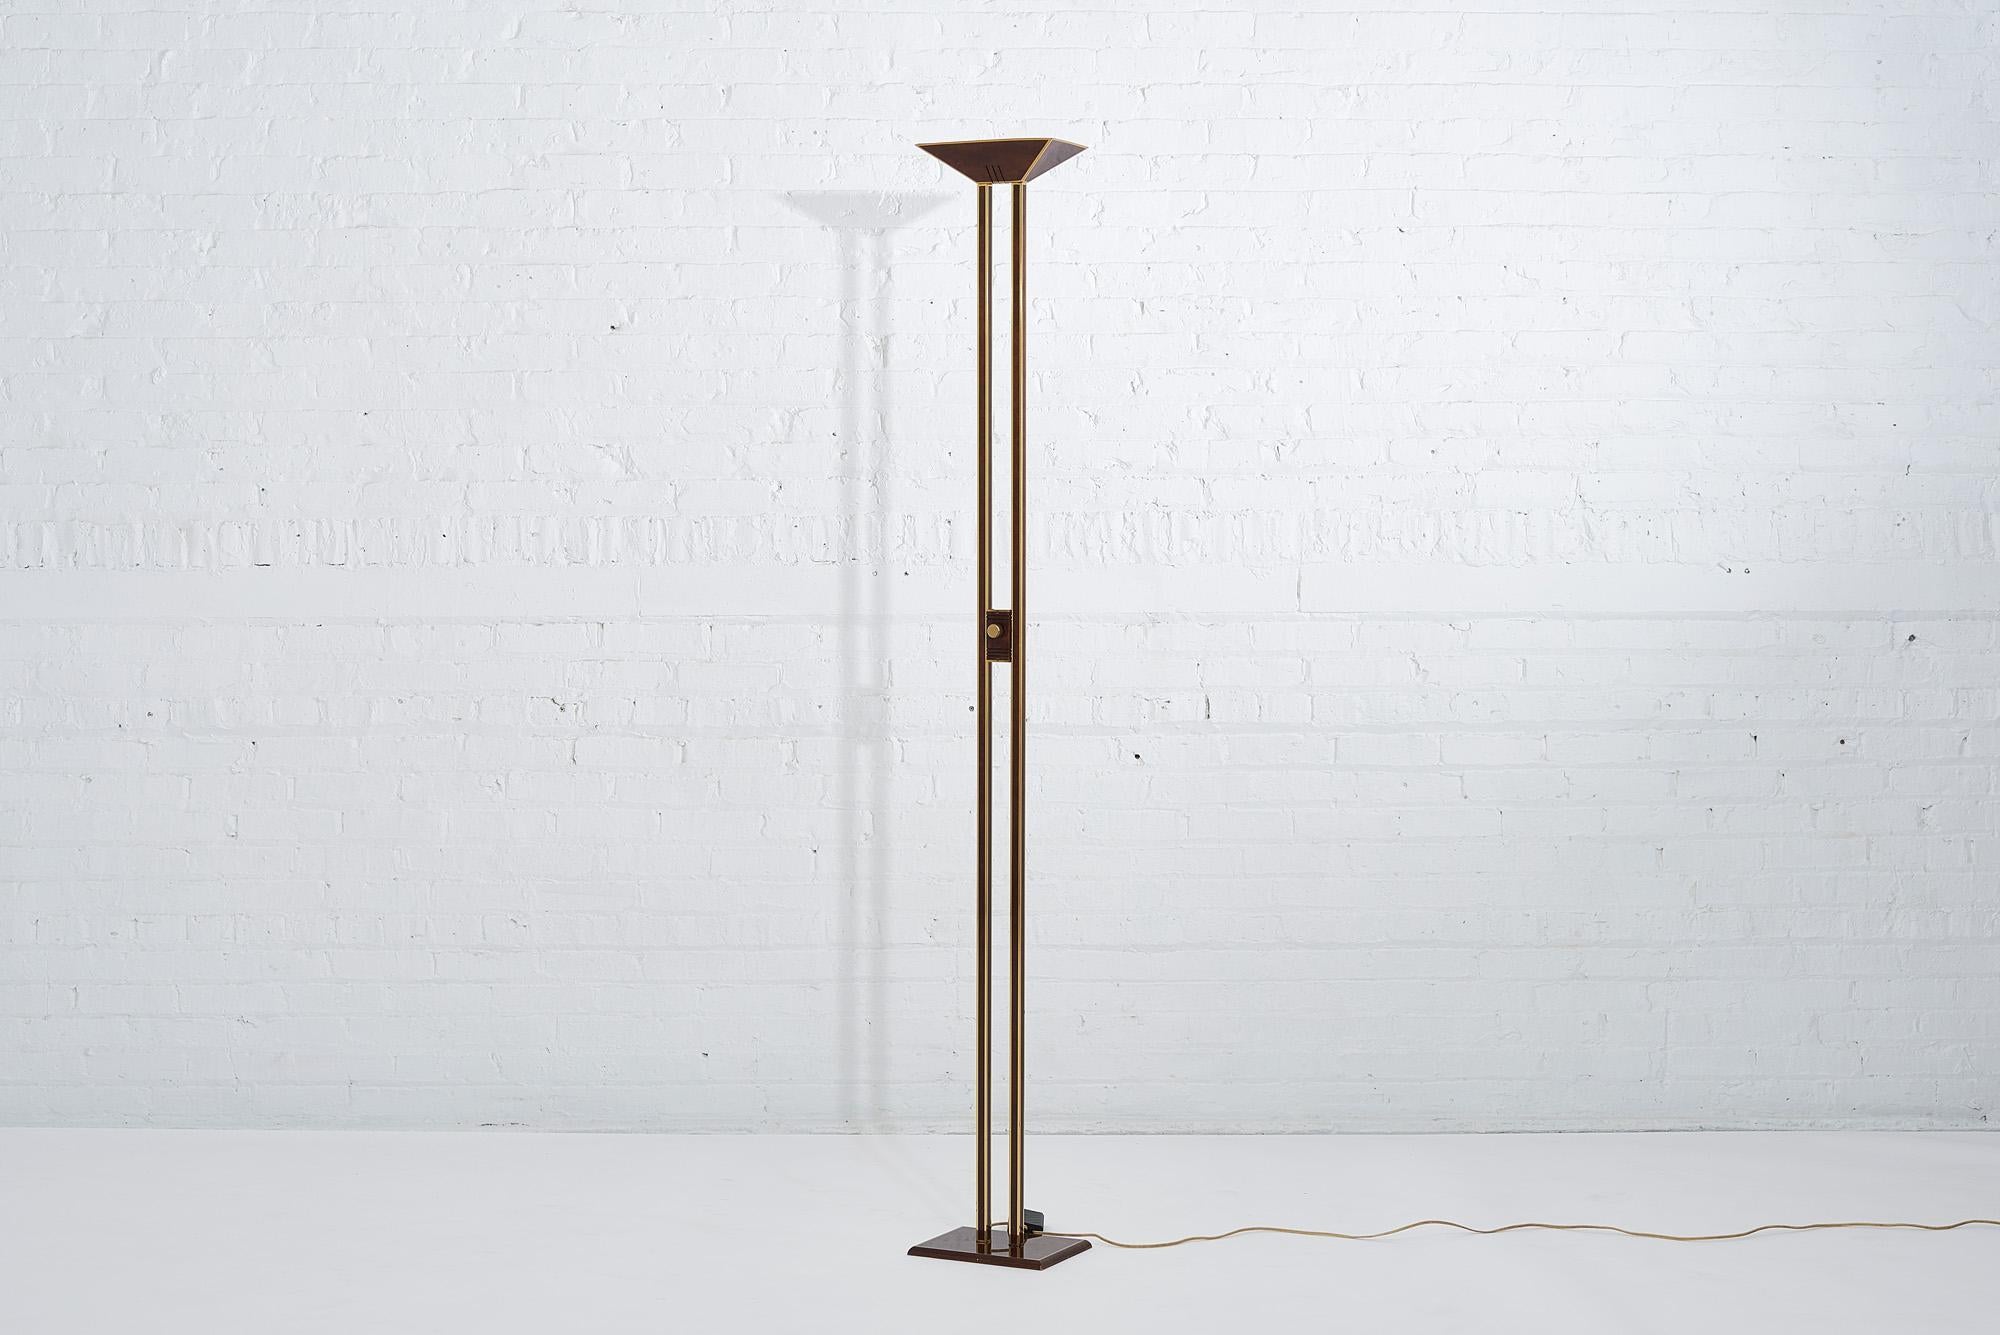 Willy Rizzo for Lumica Italian floor lamp with brass and tortoiseshell enamel, circa 1960.